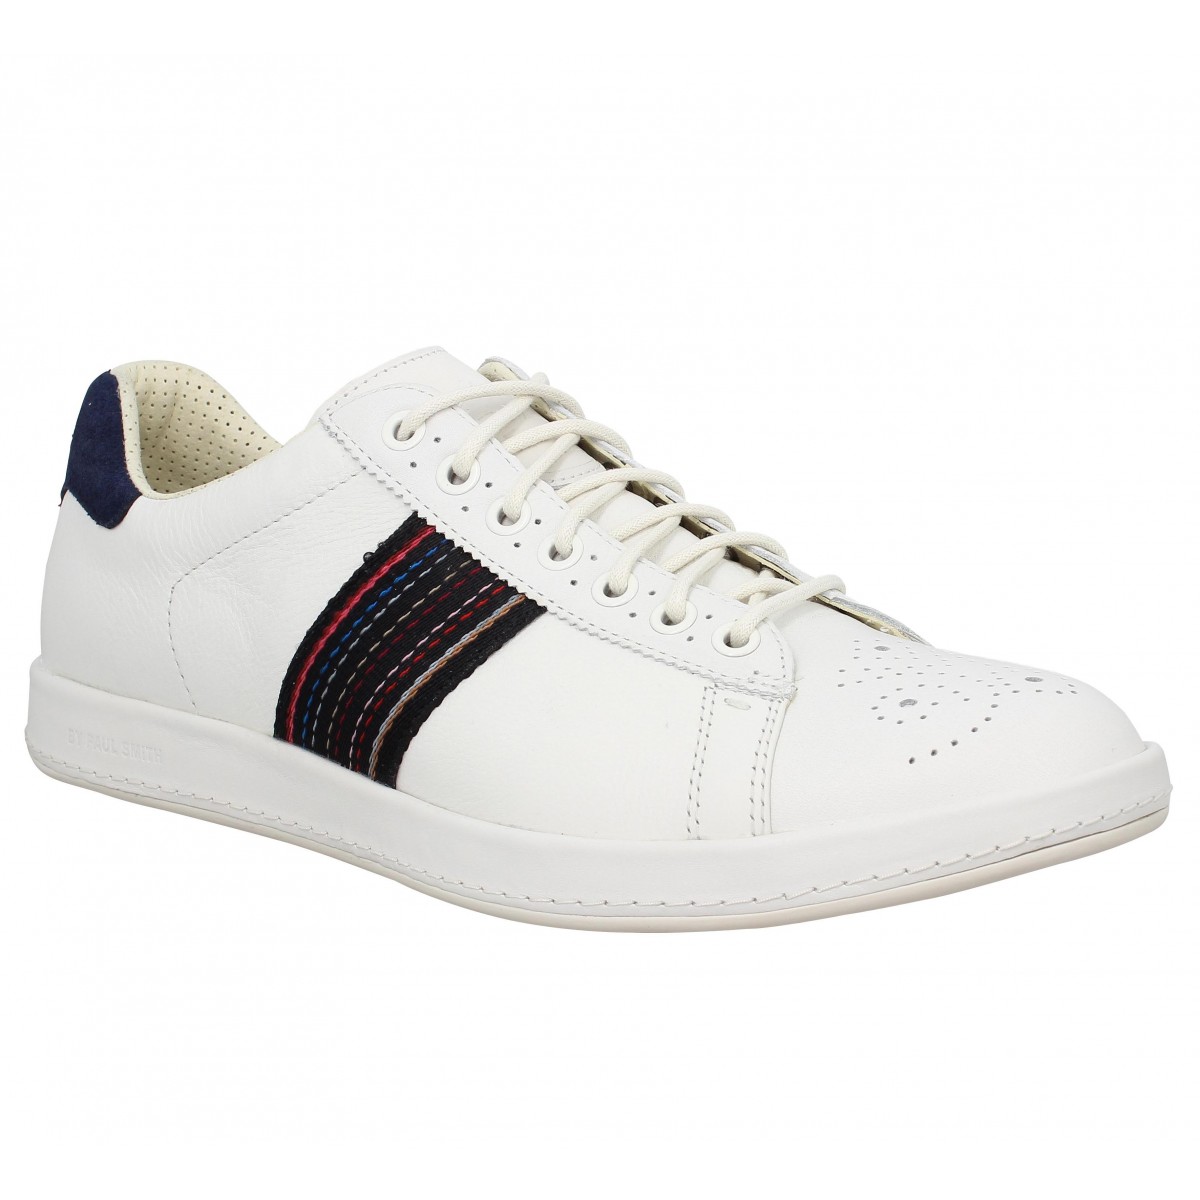 chaussures homme paul smith